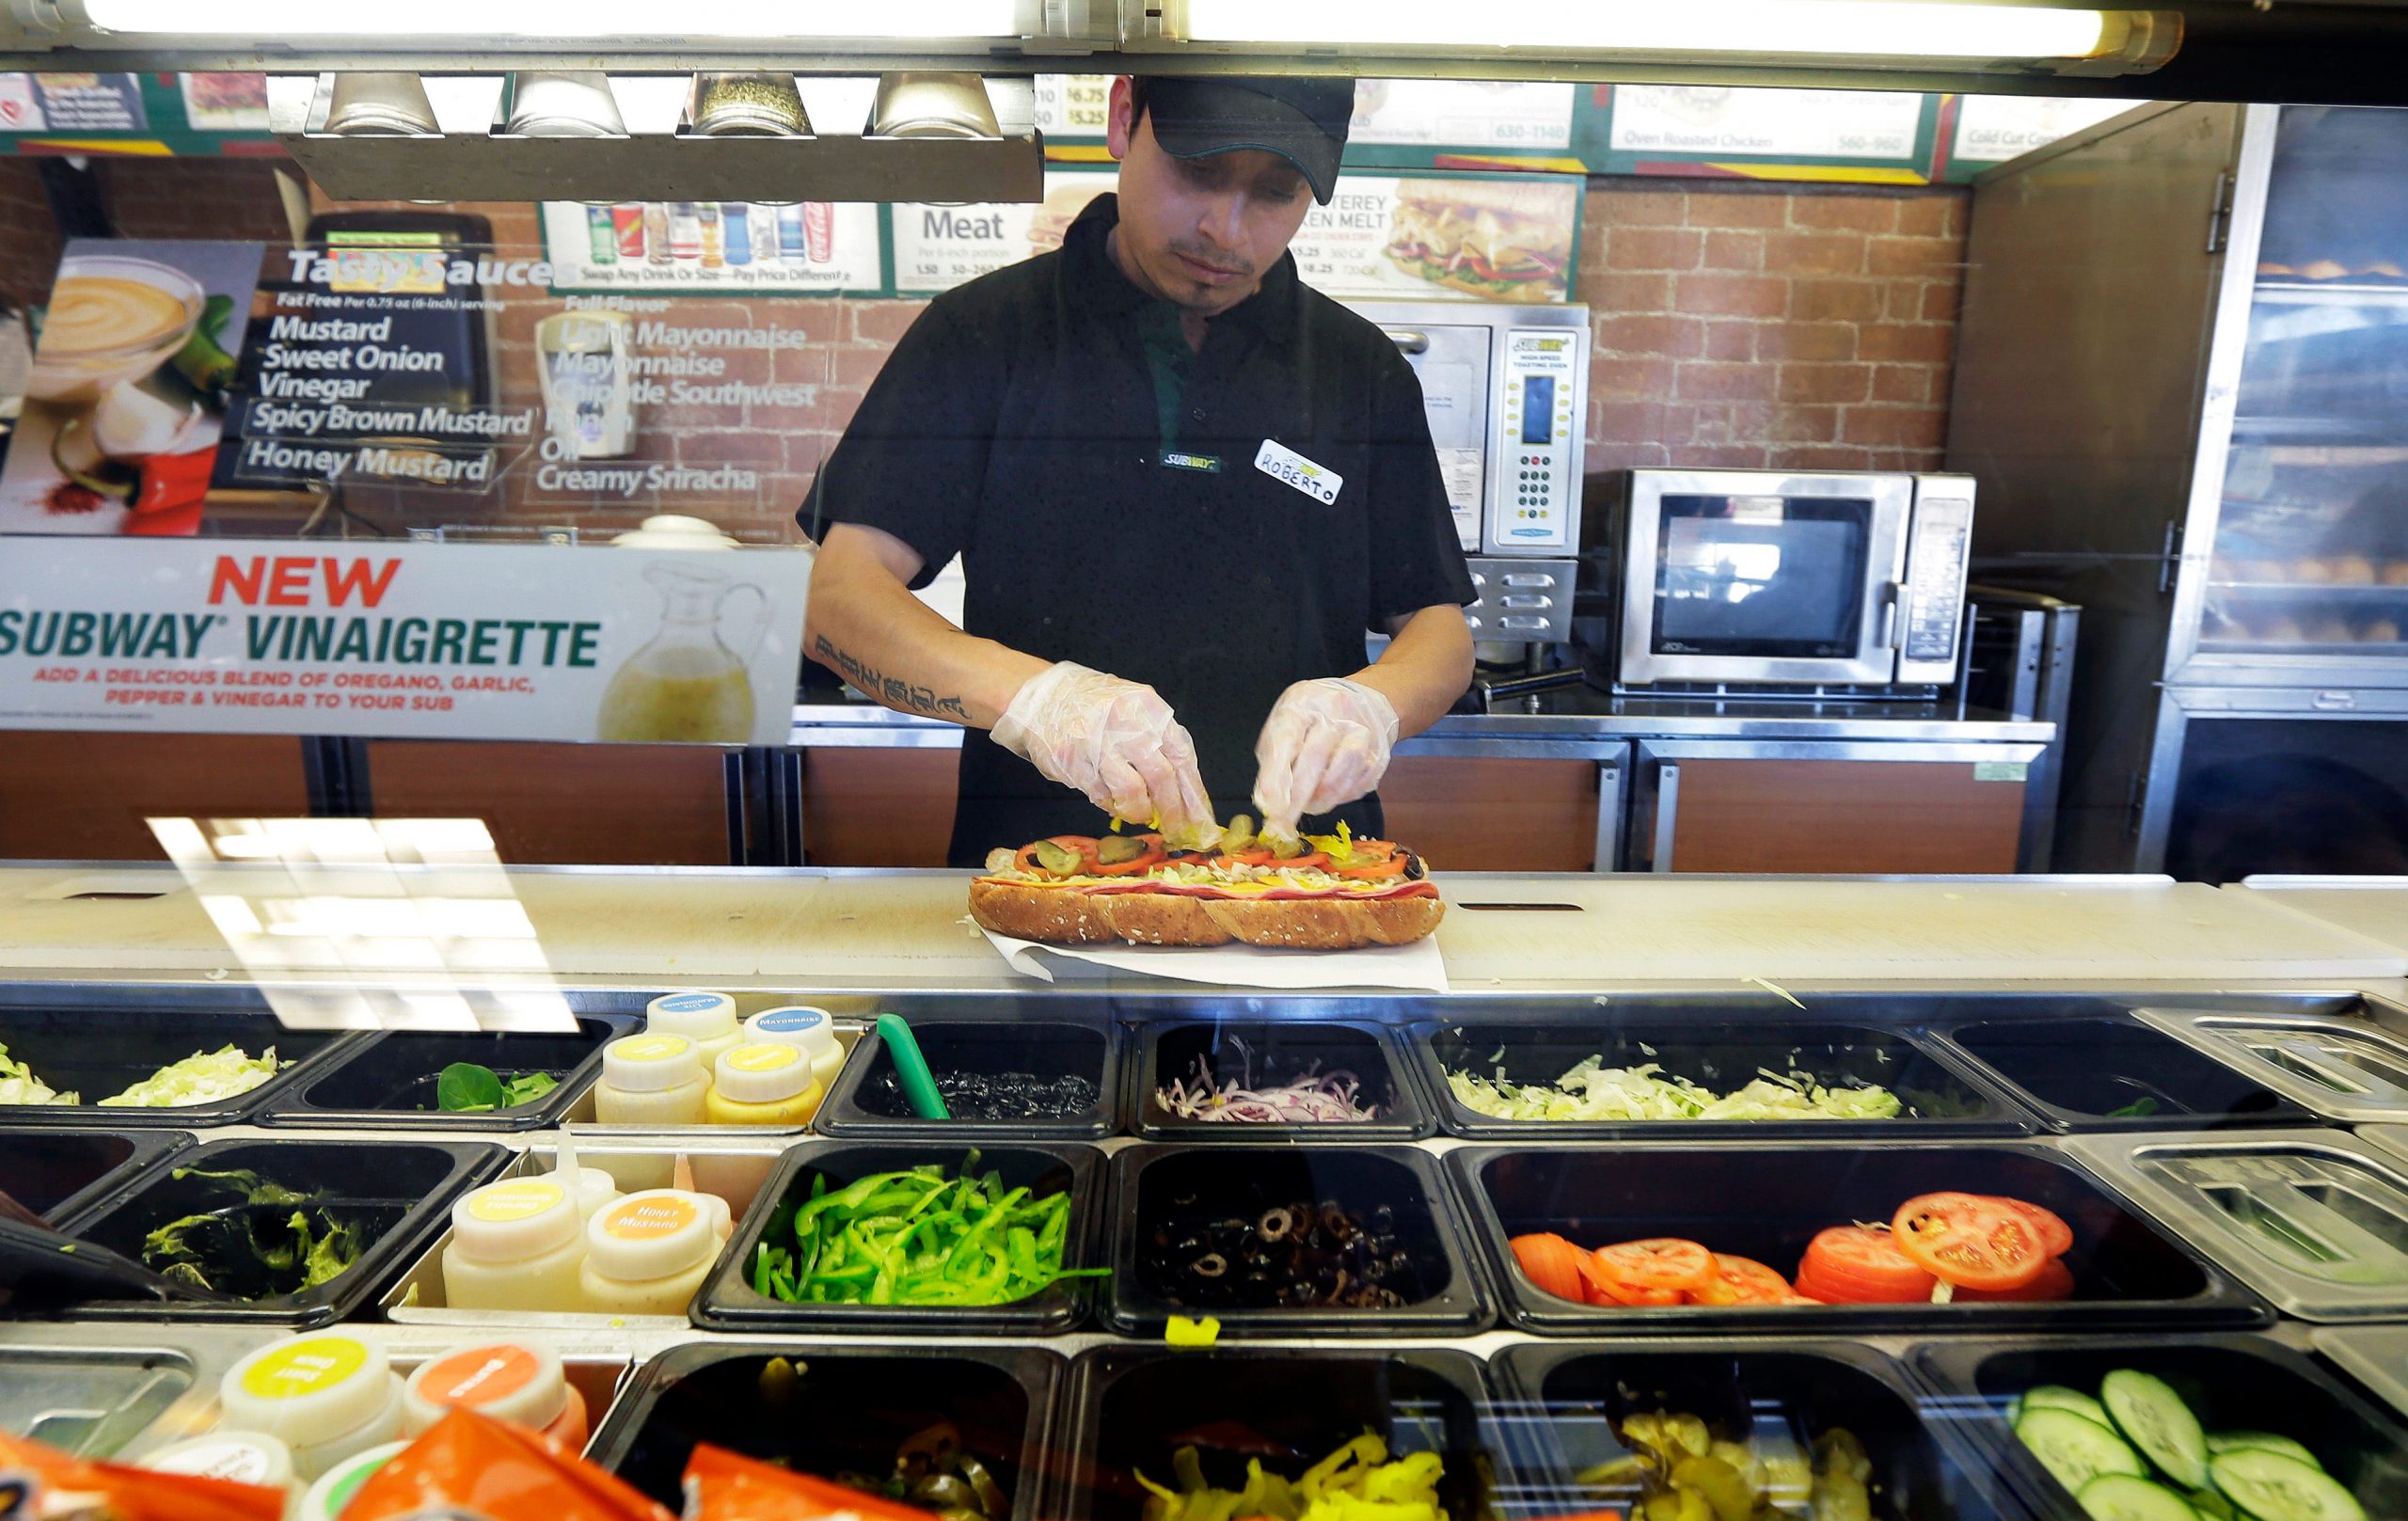 A man in a restaurant uniform makes a Subway sandwich with pickles and tomatoes